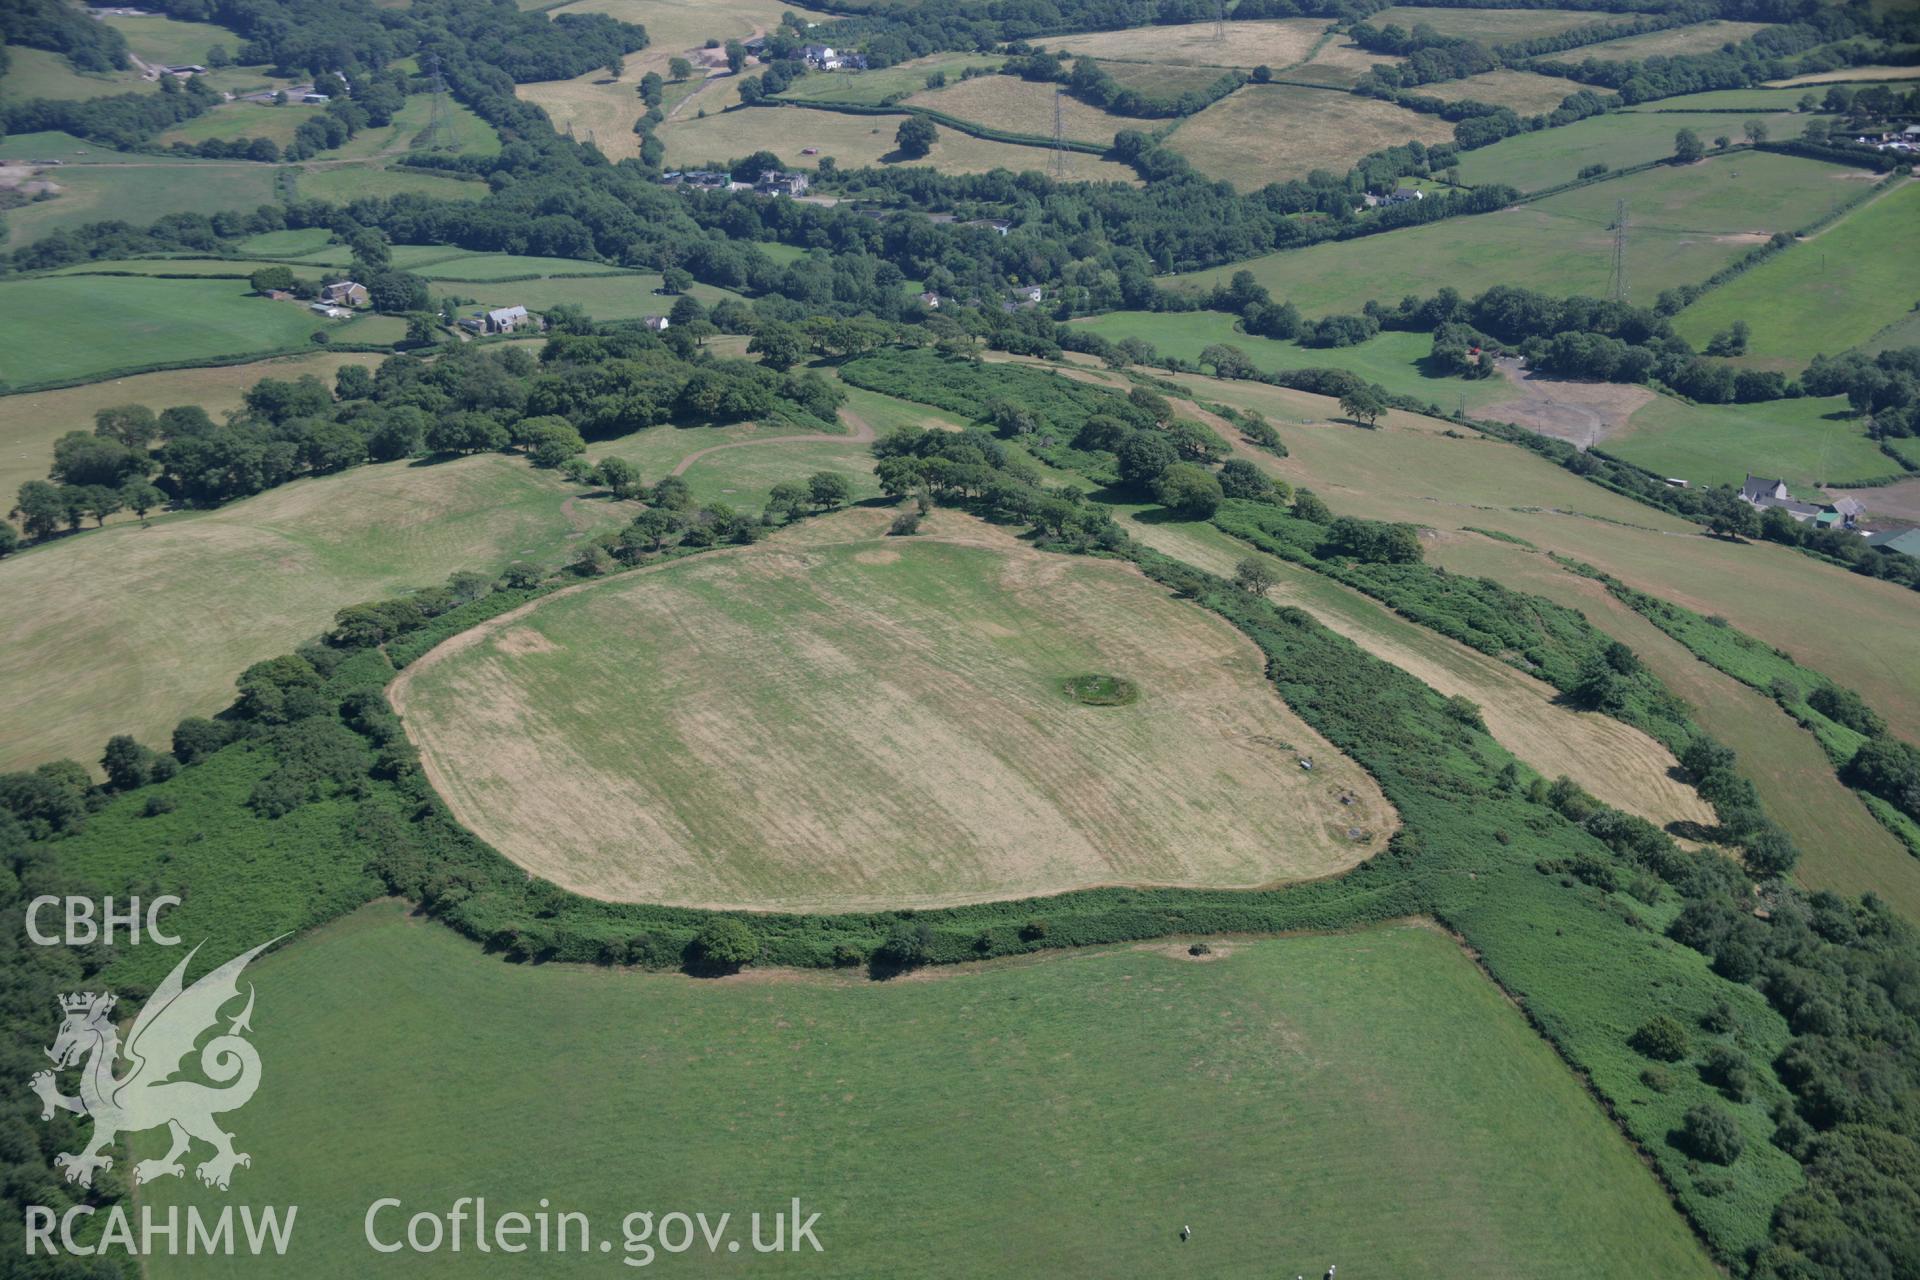 RCAHMW colour oblique aerial photograph of Caerau Hillfort, Rhiwsaeson, Llantrisant. Taken on 24 July 2006 by Toby Driver.